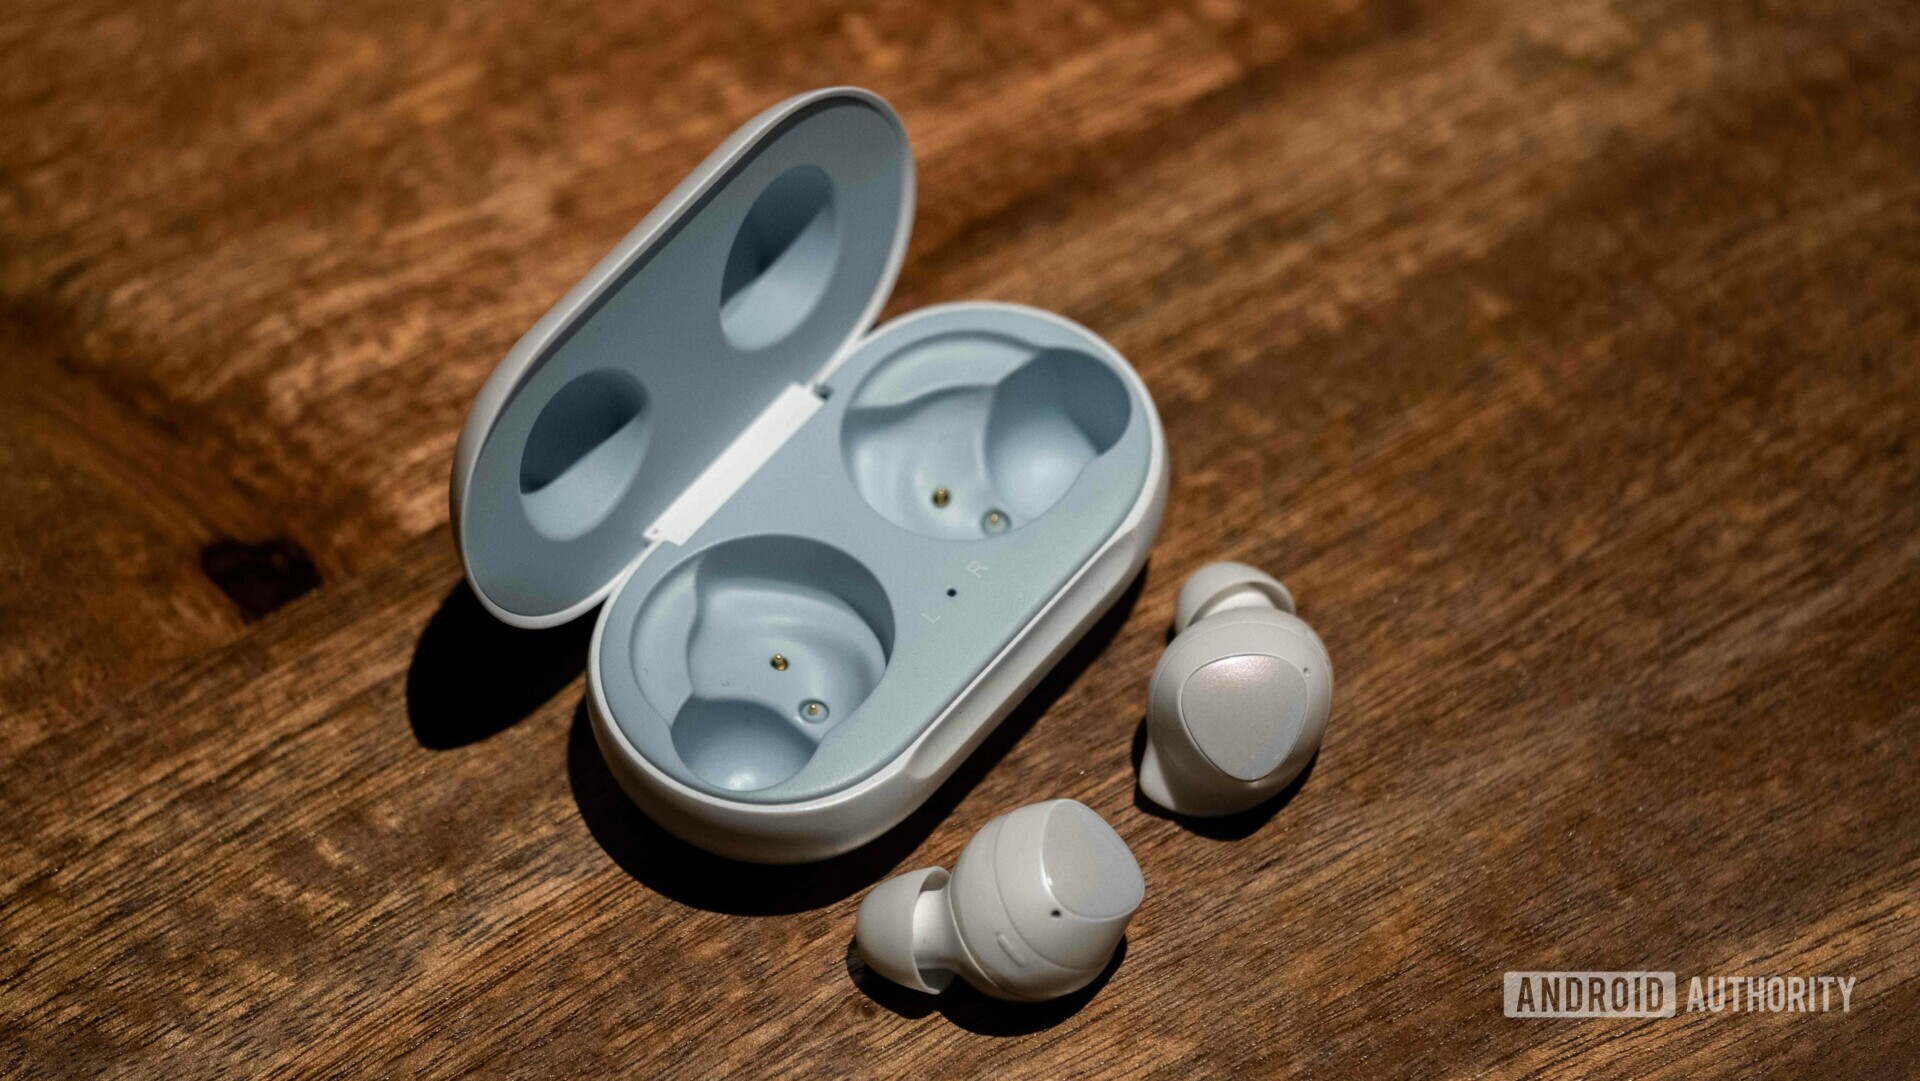 Samsung Galaxy Buds layed out on a wooden desk next to an opened case.